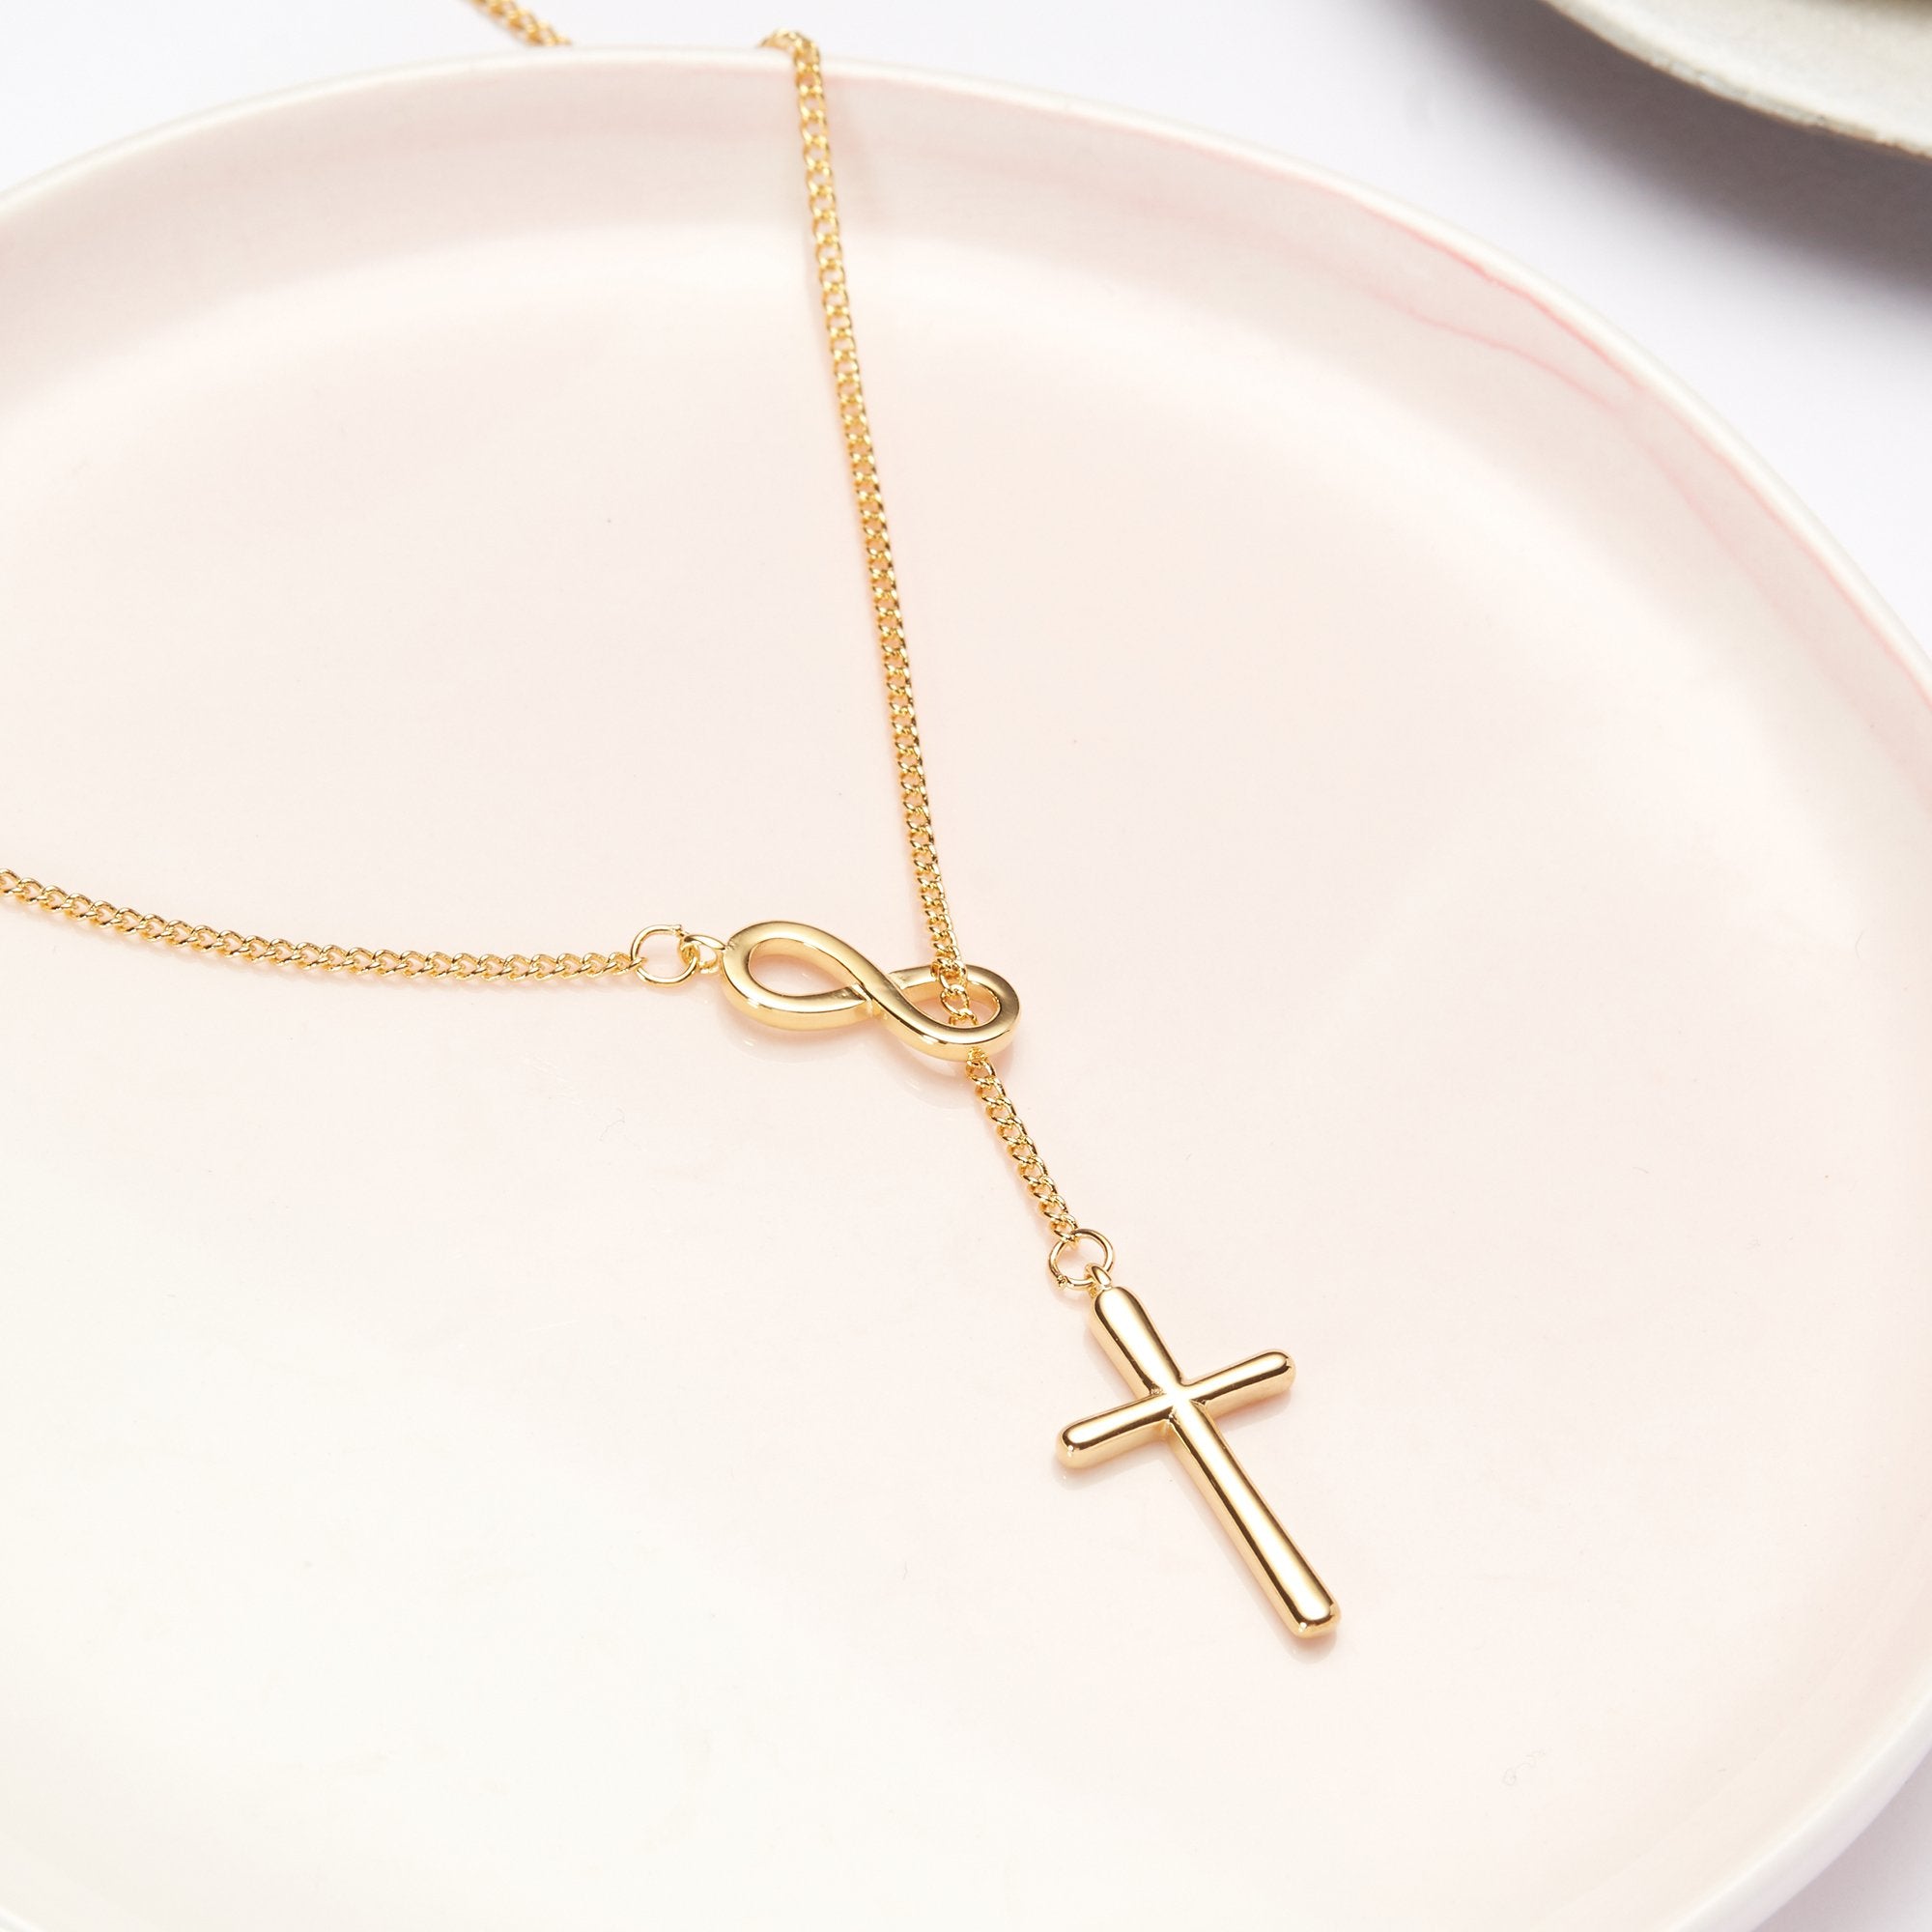 10K Gold Filled Baby Cross Necklace in a Budded Design